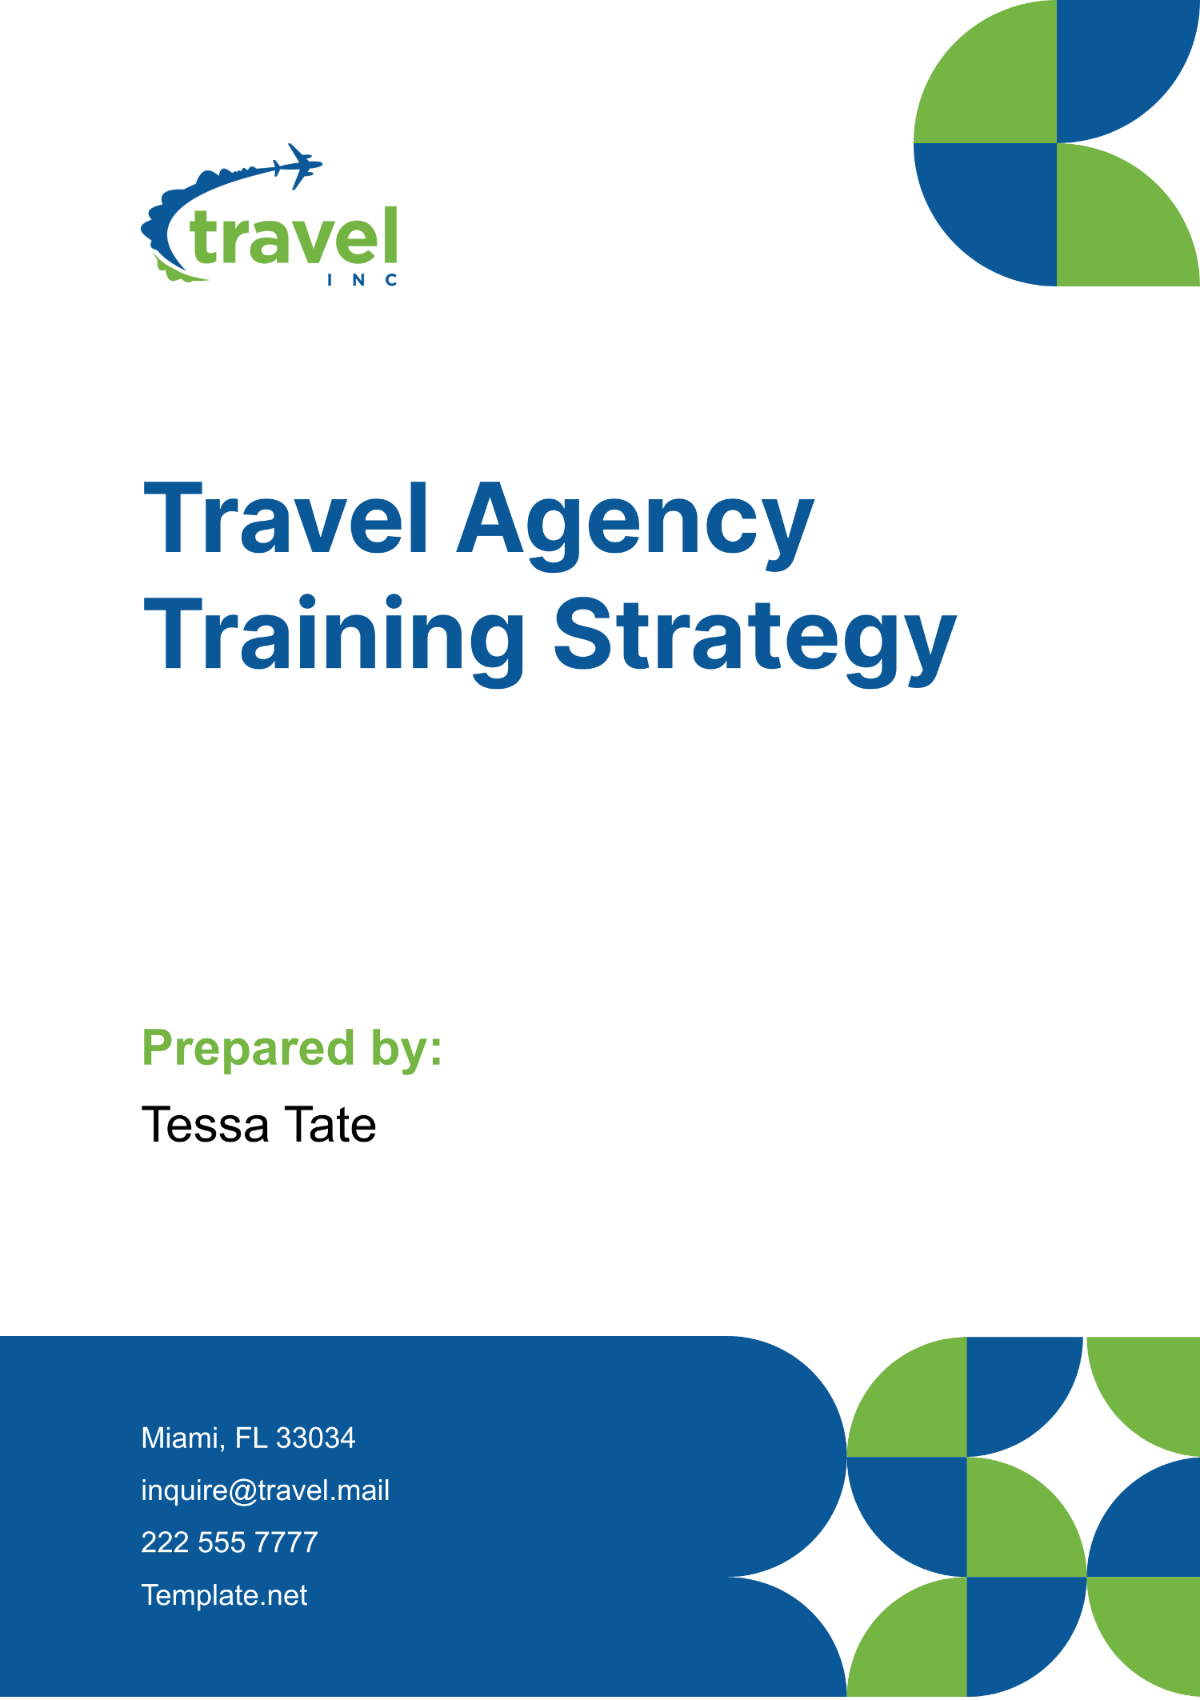 Travel Agency Training Strategy Template